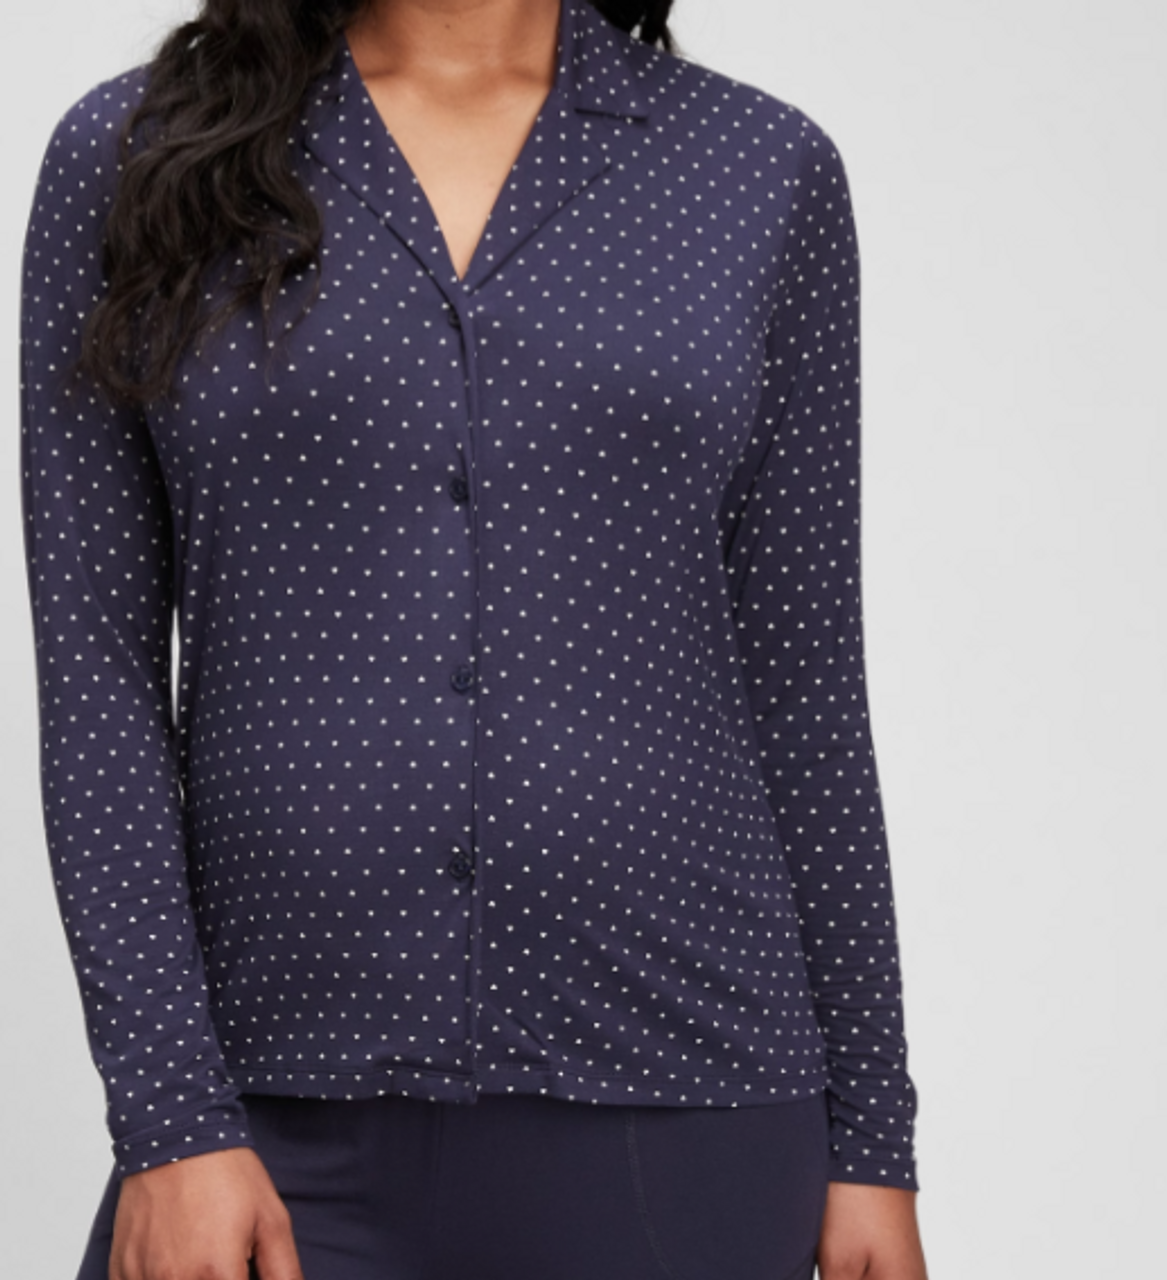 https://cdn11.bigcommerce.com/s-r23r6d/images/stencil/1280x1280/products/12462/25404/GAP_Maternity_Navy_with_Heart_Print_Modal_PJ_Shirt_and_Pants_Set_Gently_Used_-_Size_X-Small__60063.1698484368.png?c=2?imbypass=on